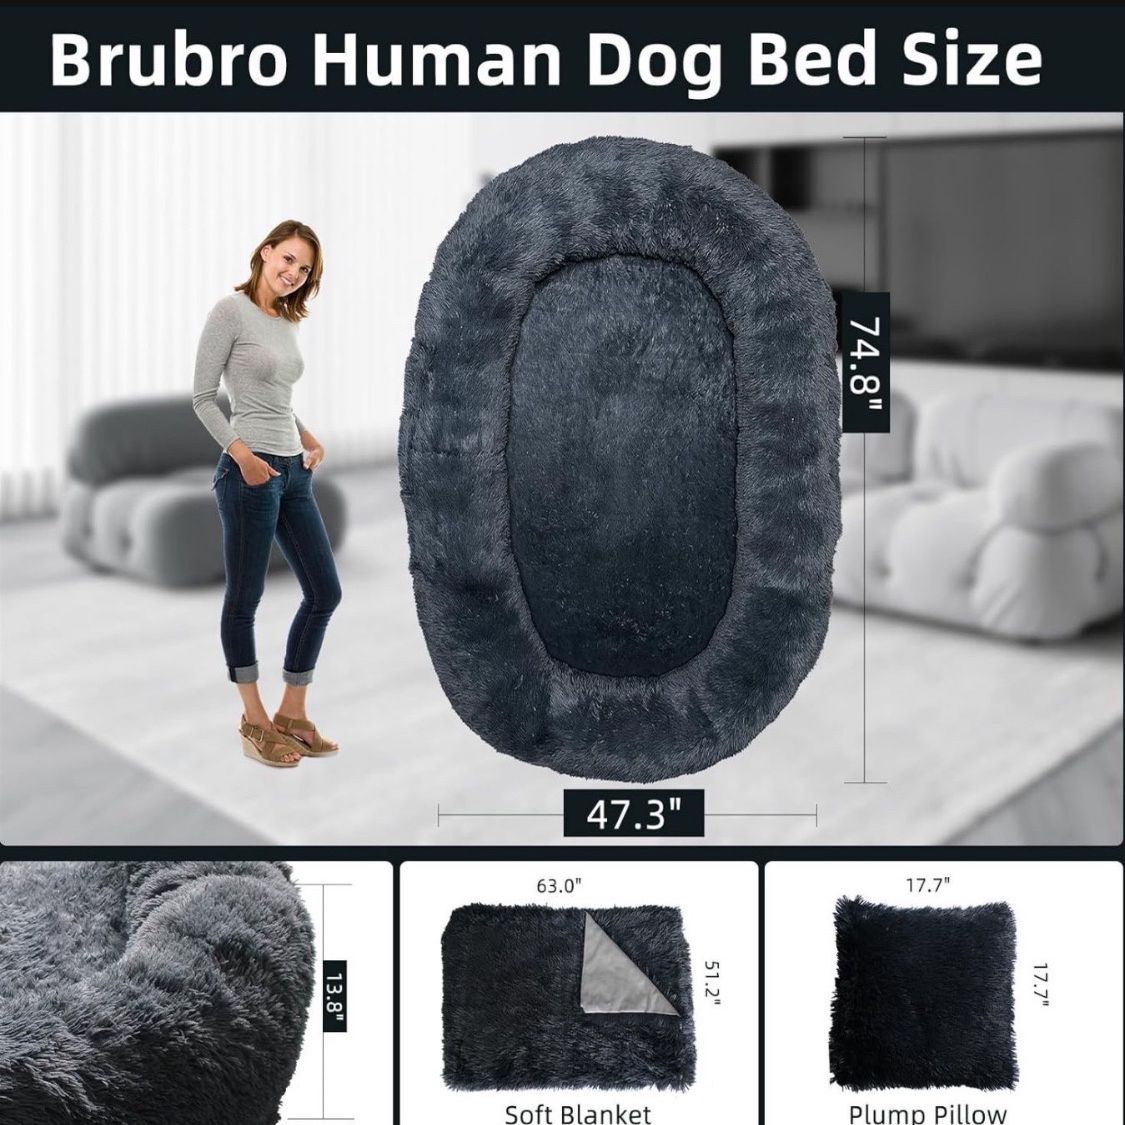 Large Human Dog Bed for Adult,74.8"x47.3"x13.8" Human Sized Dog Bed for People and Pets,Removable and Washable Faux Fur Giant Dog Bed for Humans with 